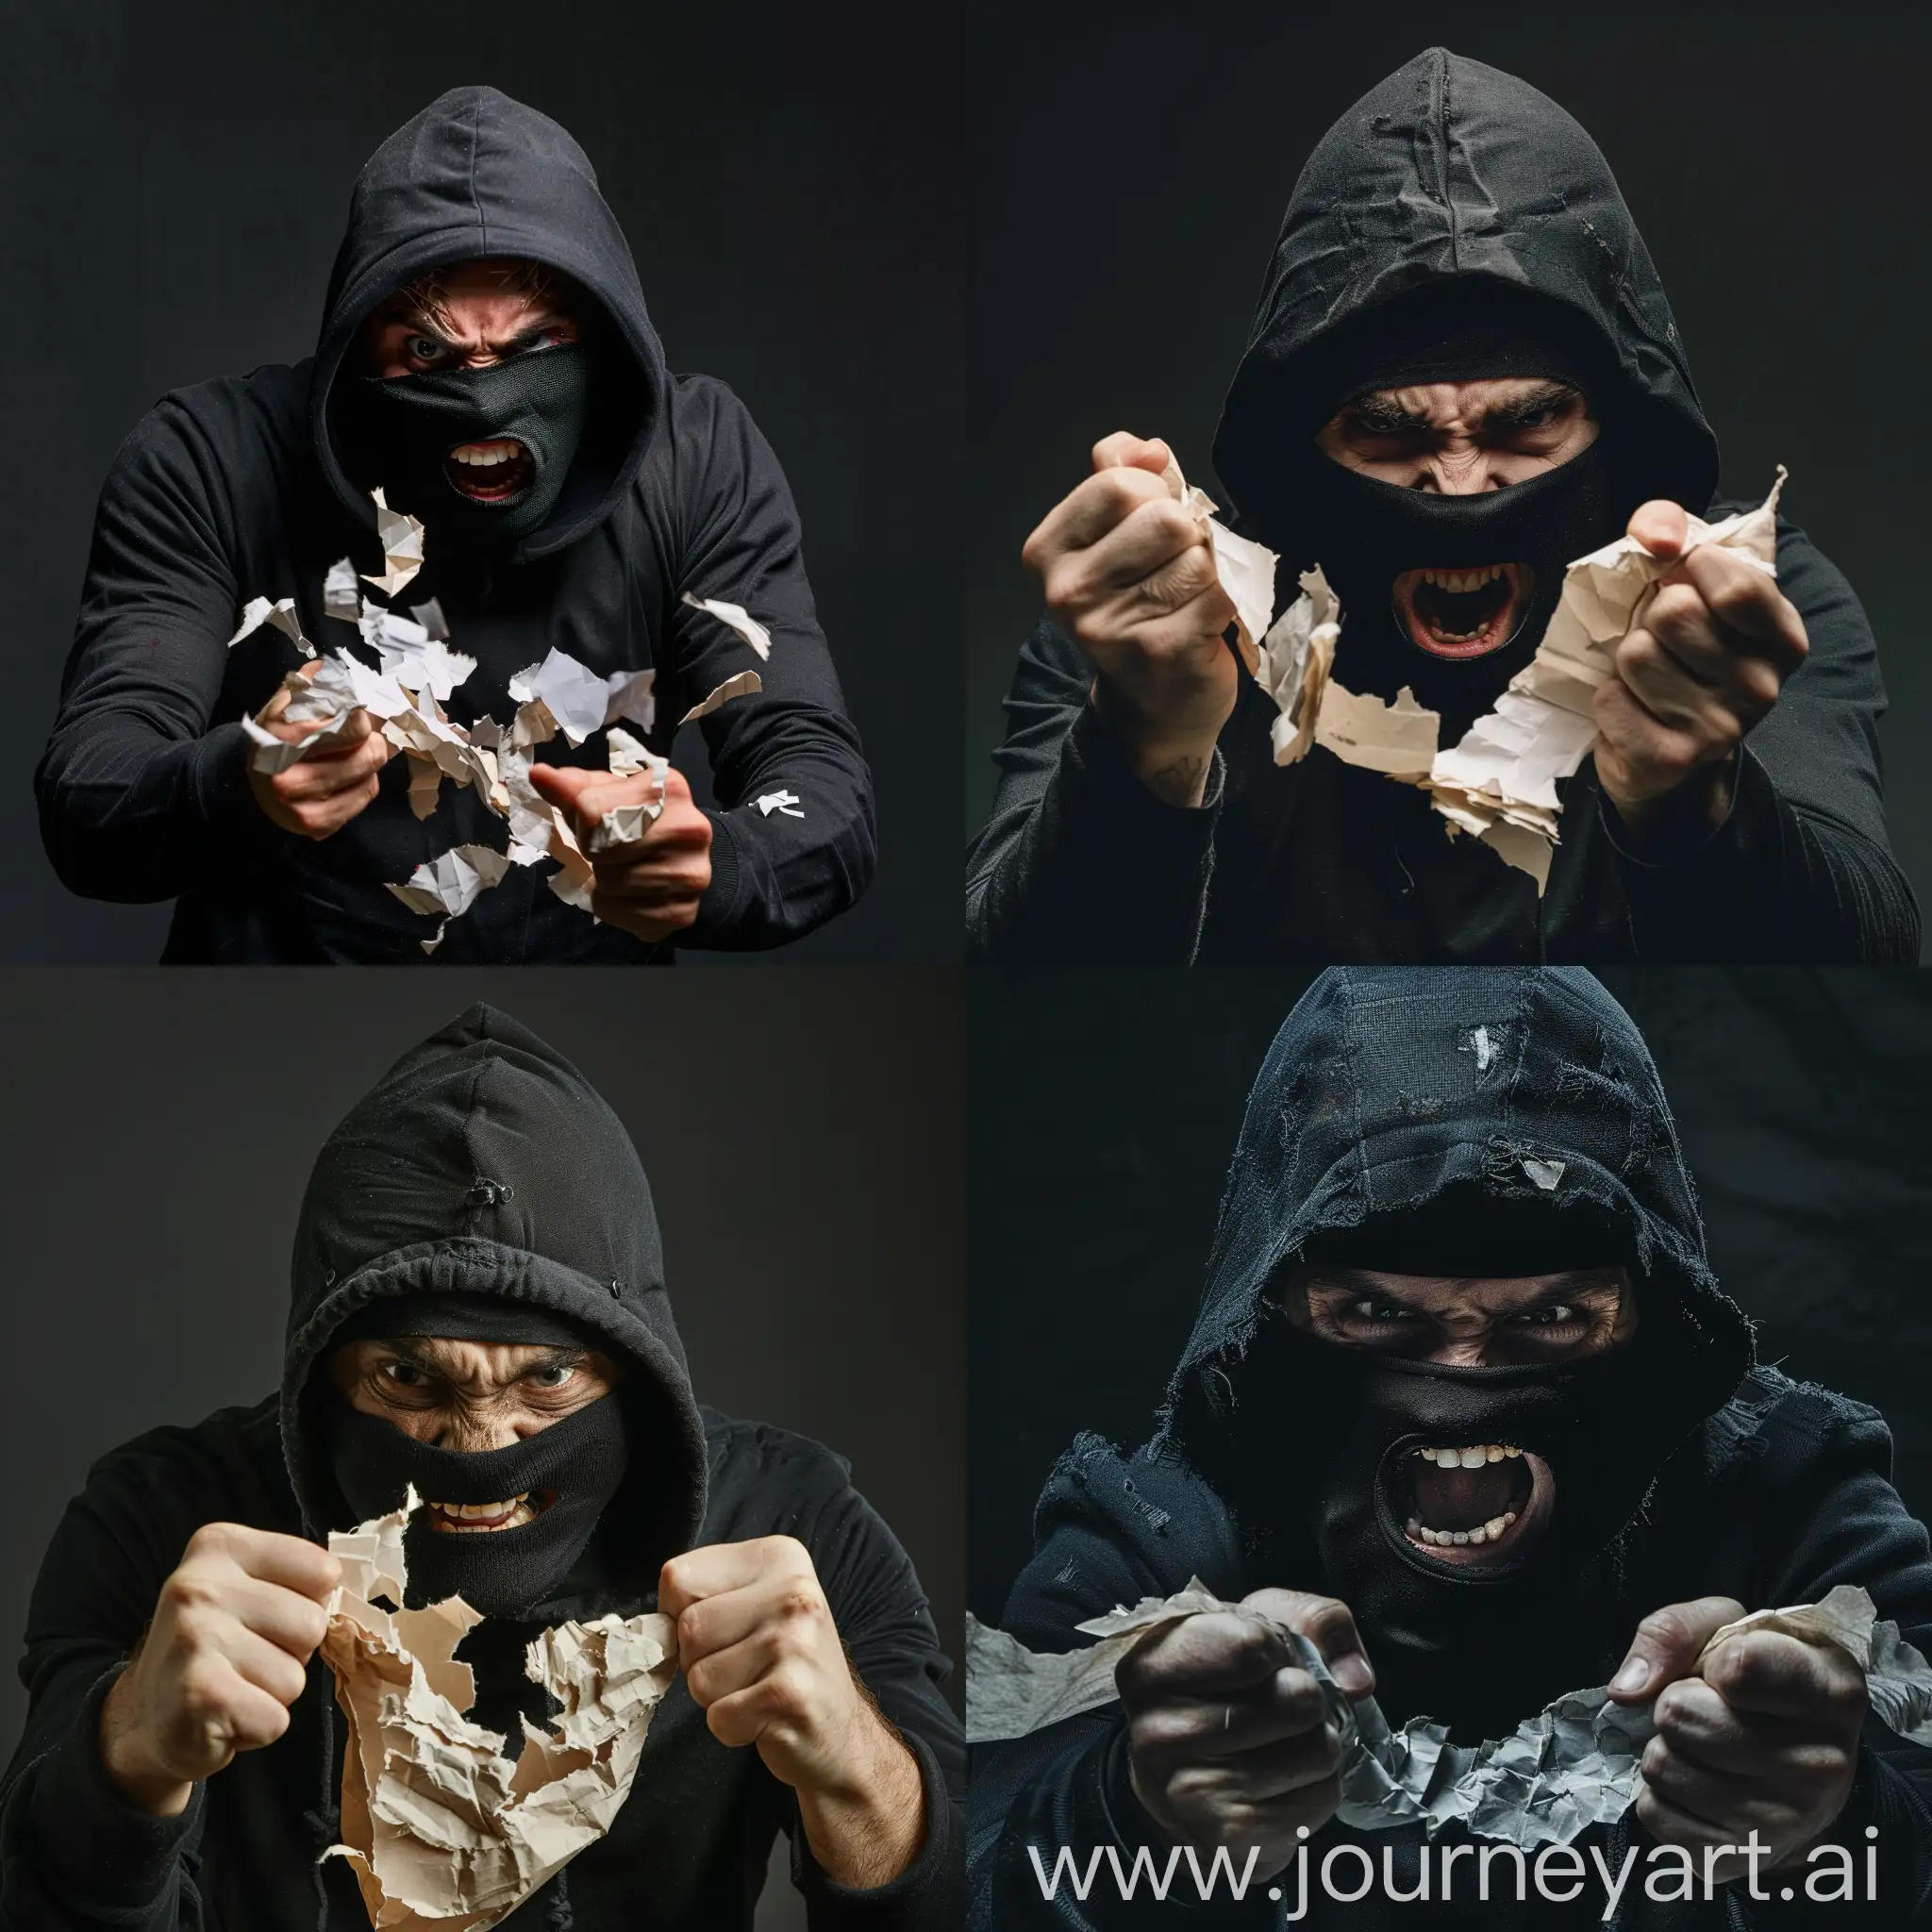 Intense-Football-Fan-in-Black-Hoodie-and-Balaclava-Clenching-Torn-Paper